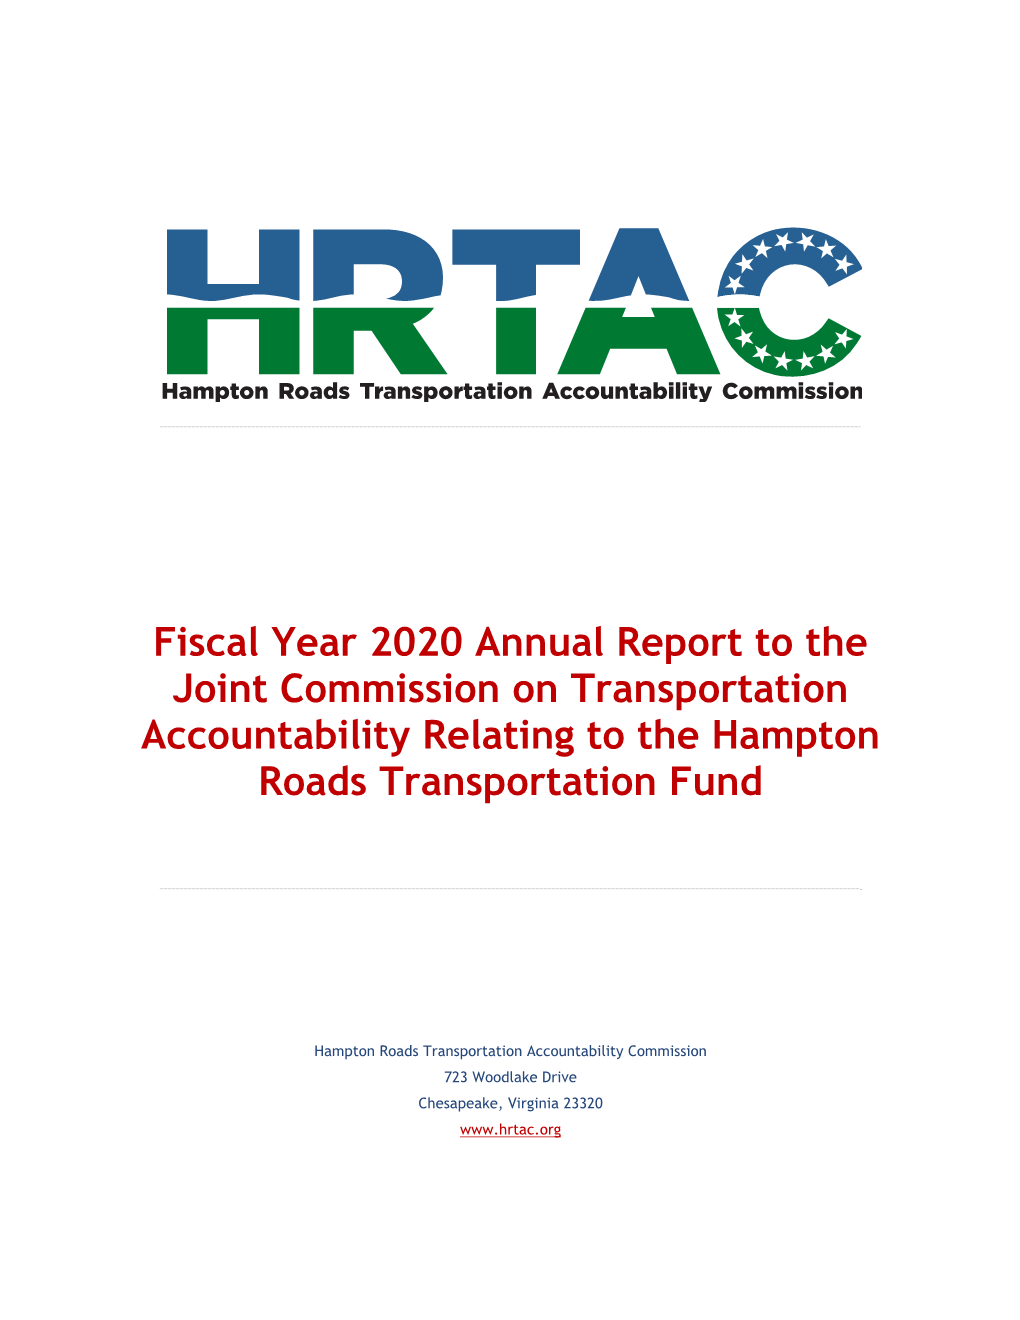 Annual Report to the Joint Commission on Transportation Accountability Relating to the Hampton Roads Transportation Fund